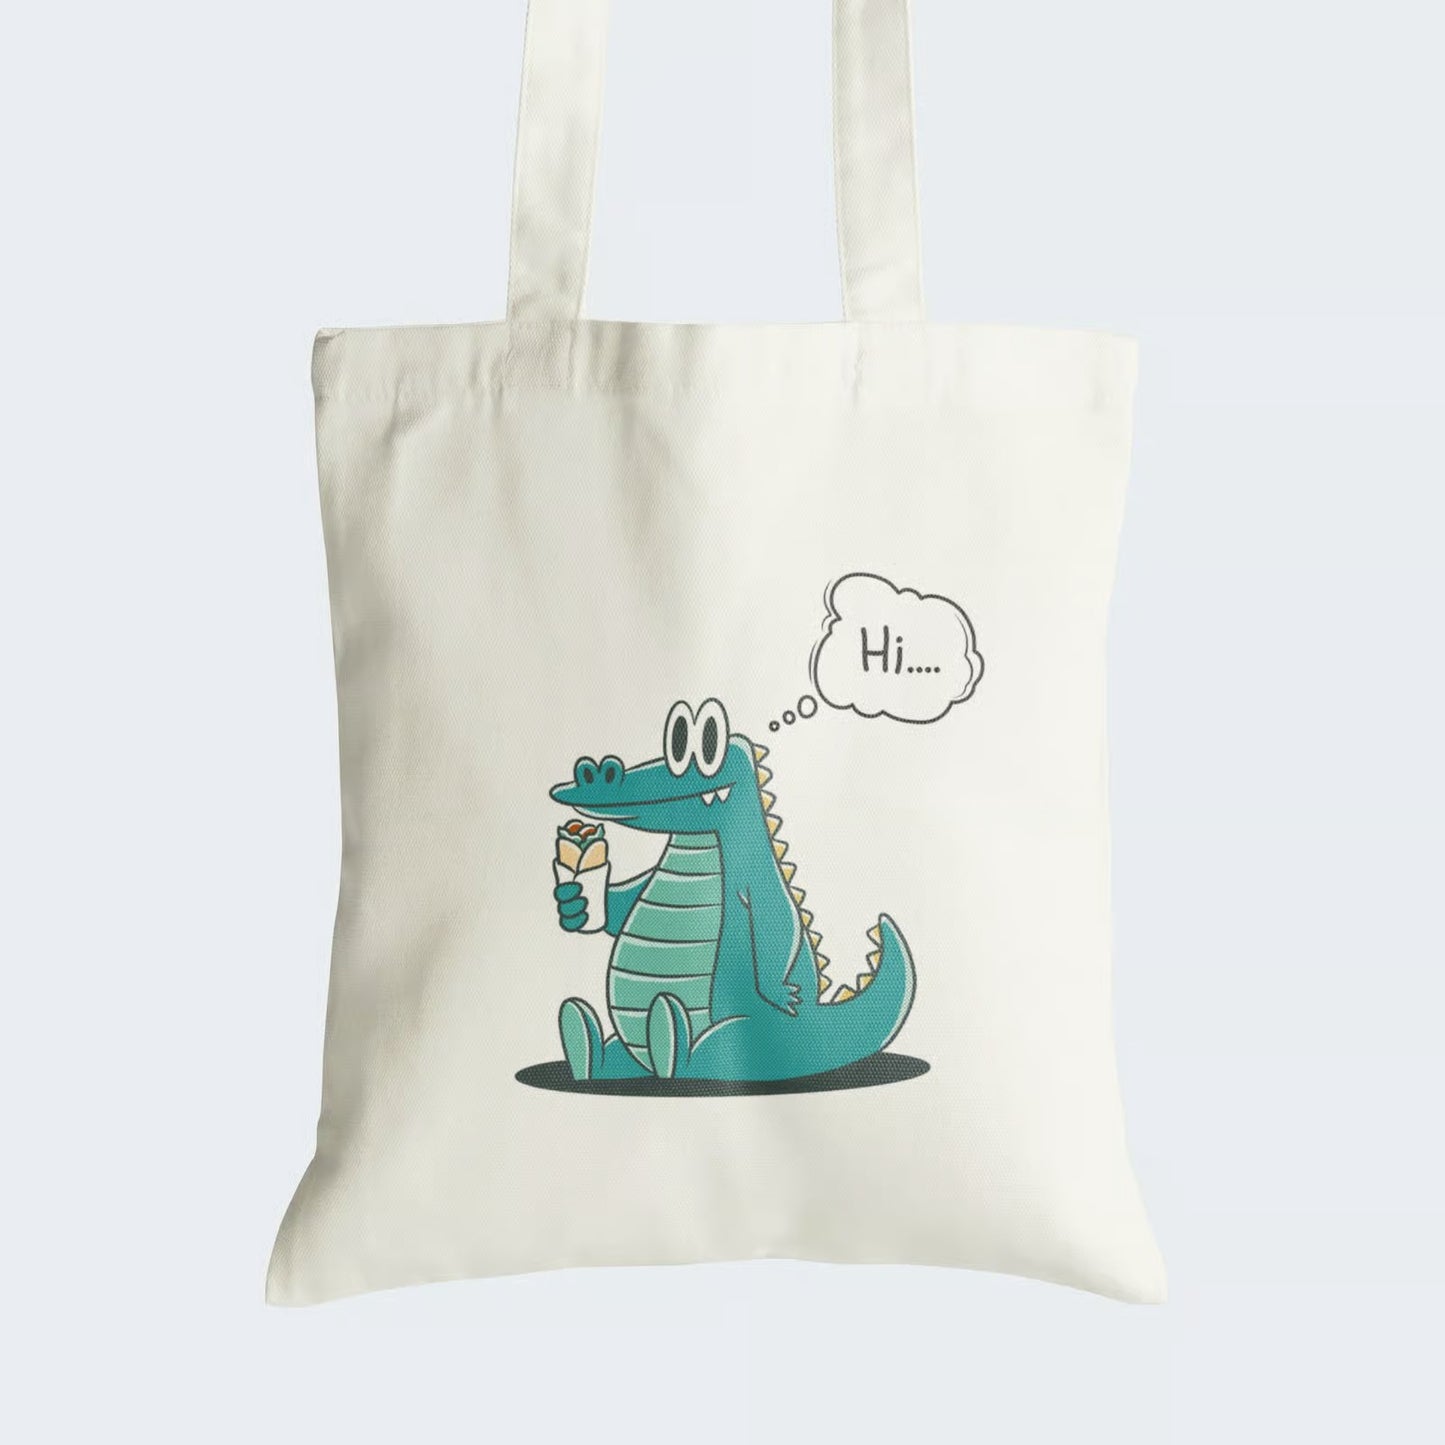 Elevate your style with our "Hi There Crocodile" Cotton Canvas Tote Bag, a delightful blend of charm and whimsy. This tote showcases an endearing image of a cute crocodile sitting on its back legs, relishing a roll, and offering a friendly "Hi..." message in a cloud above. Crafted for durability and style, it includes a secure zipper closure for daily convenience. Carry the joy of this adorable crocodile with our fashionable Cotton Canvas Tote Bag. Order yours today and spread smiles wherever you go!